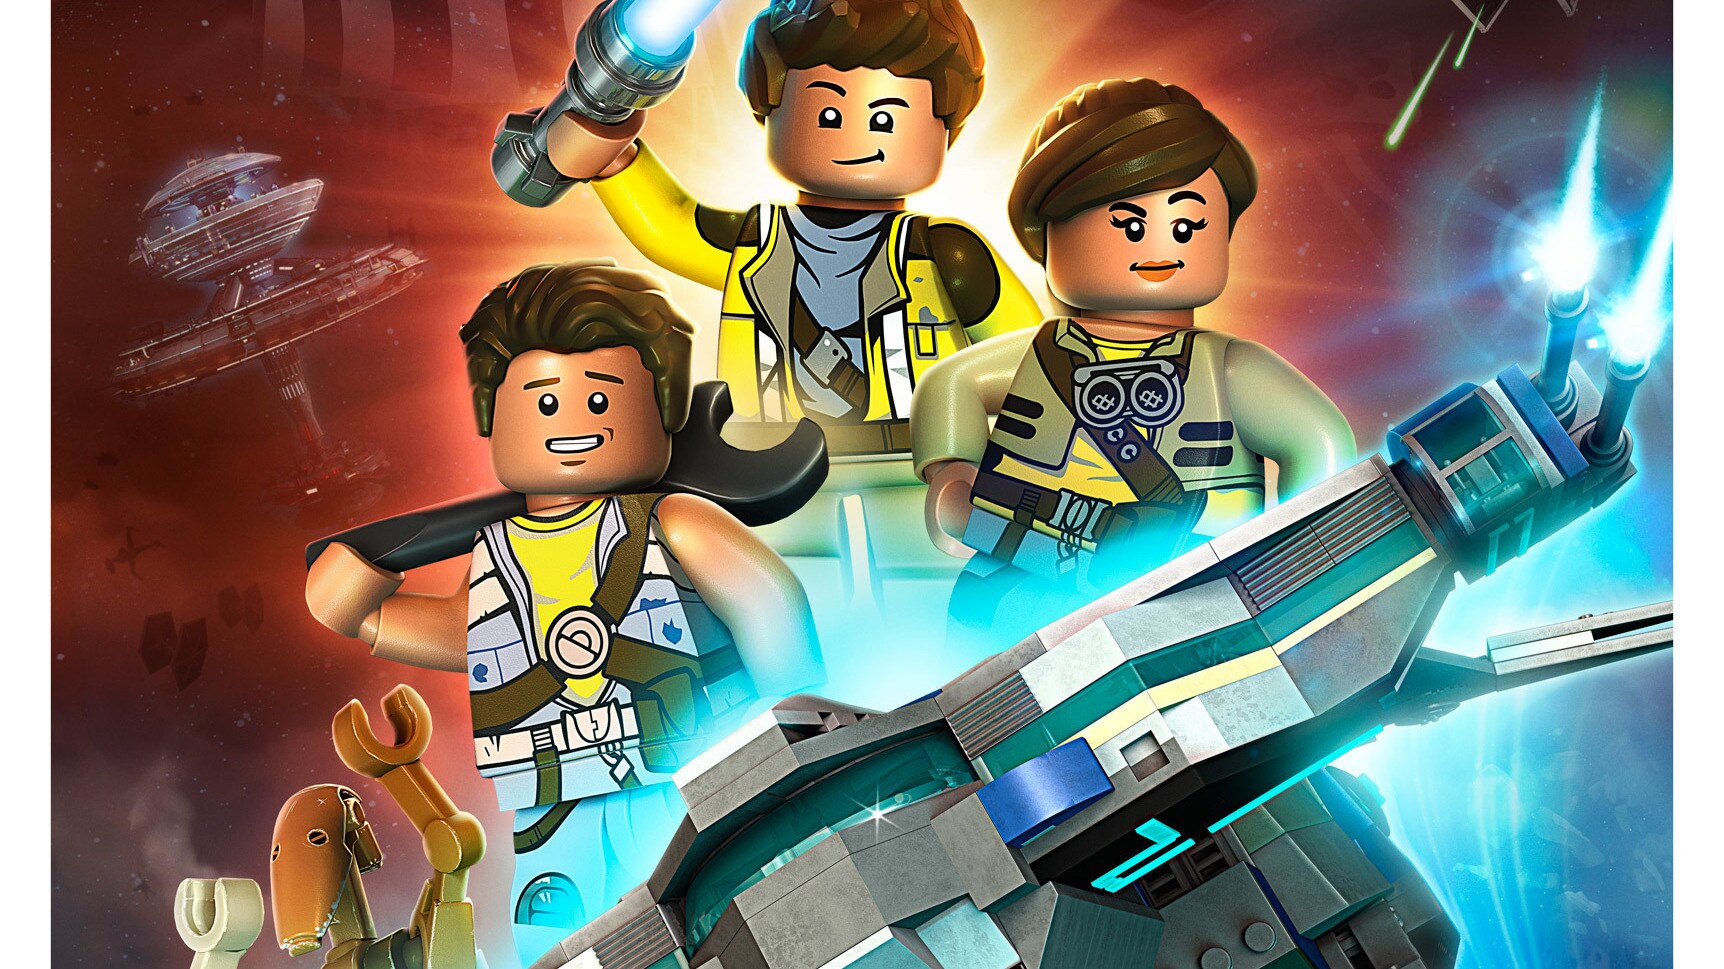 LEGO Star Wars: The Freemaker Adventures Animated Series Coming to Disney XD This Summer